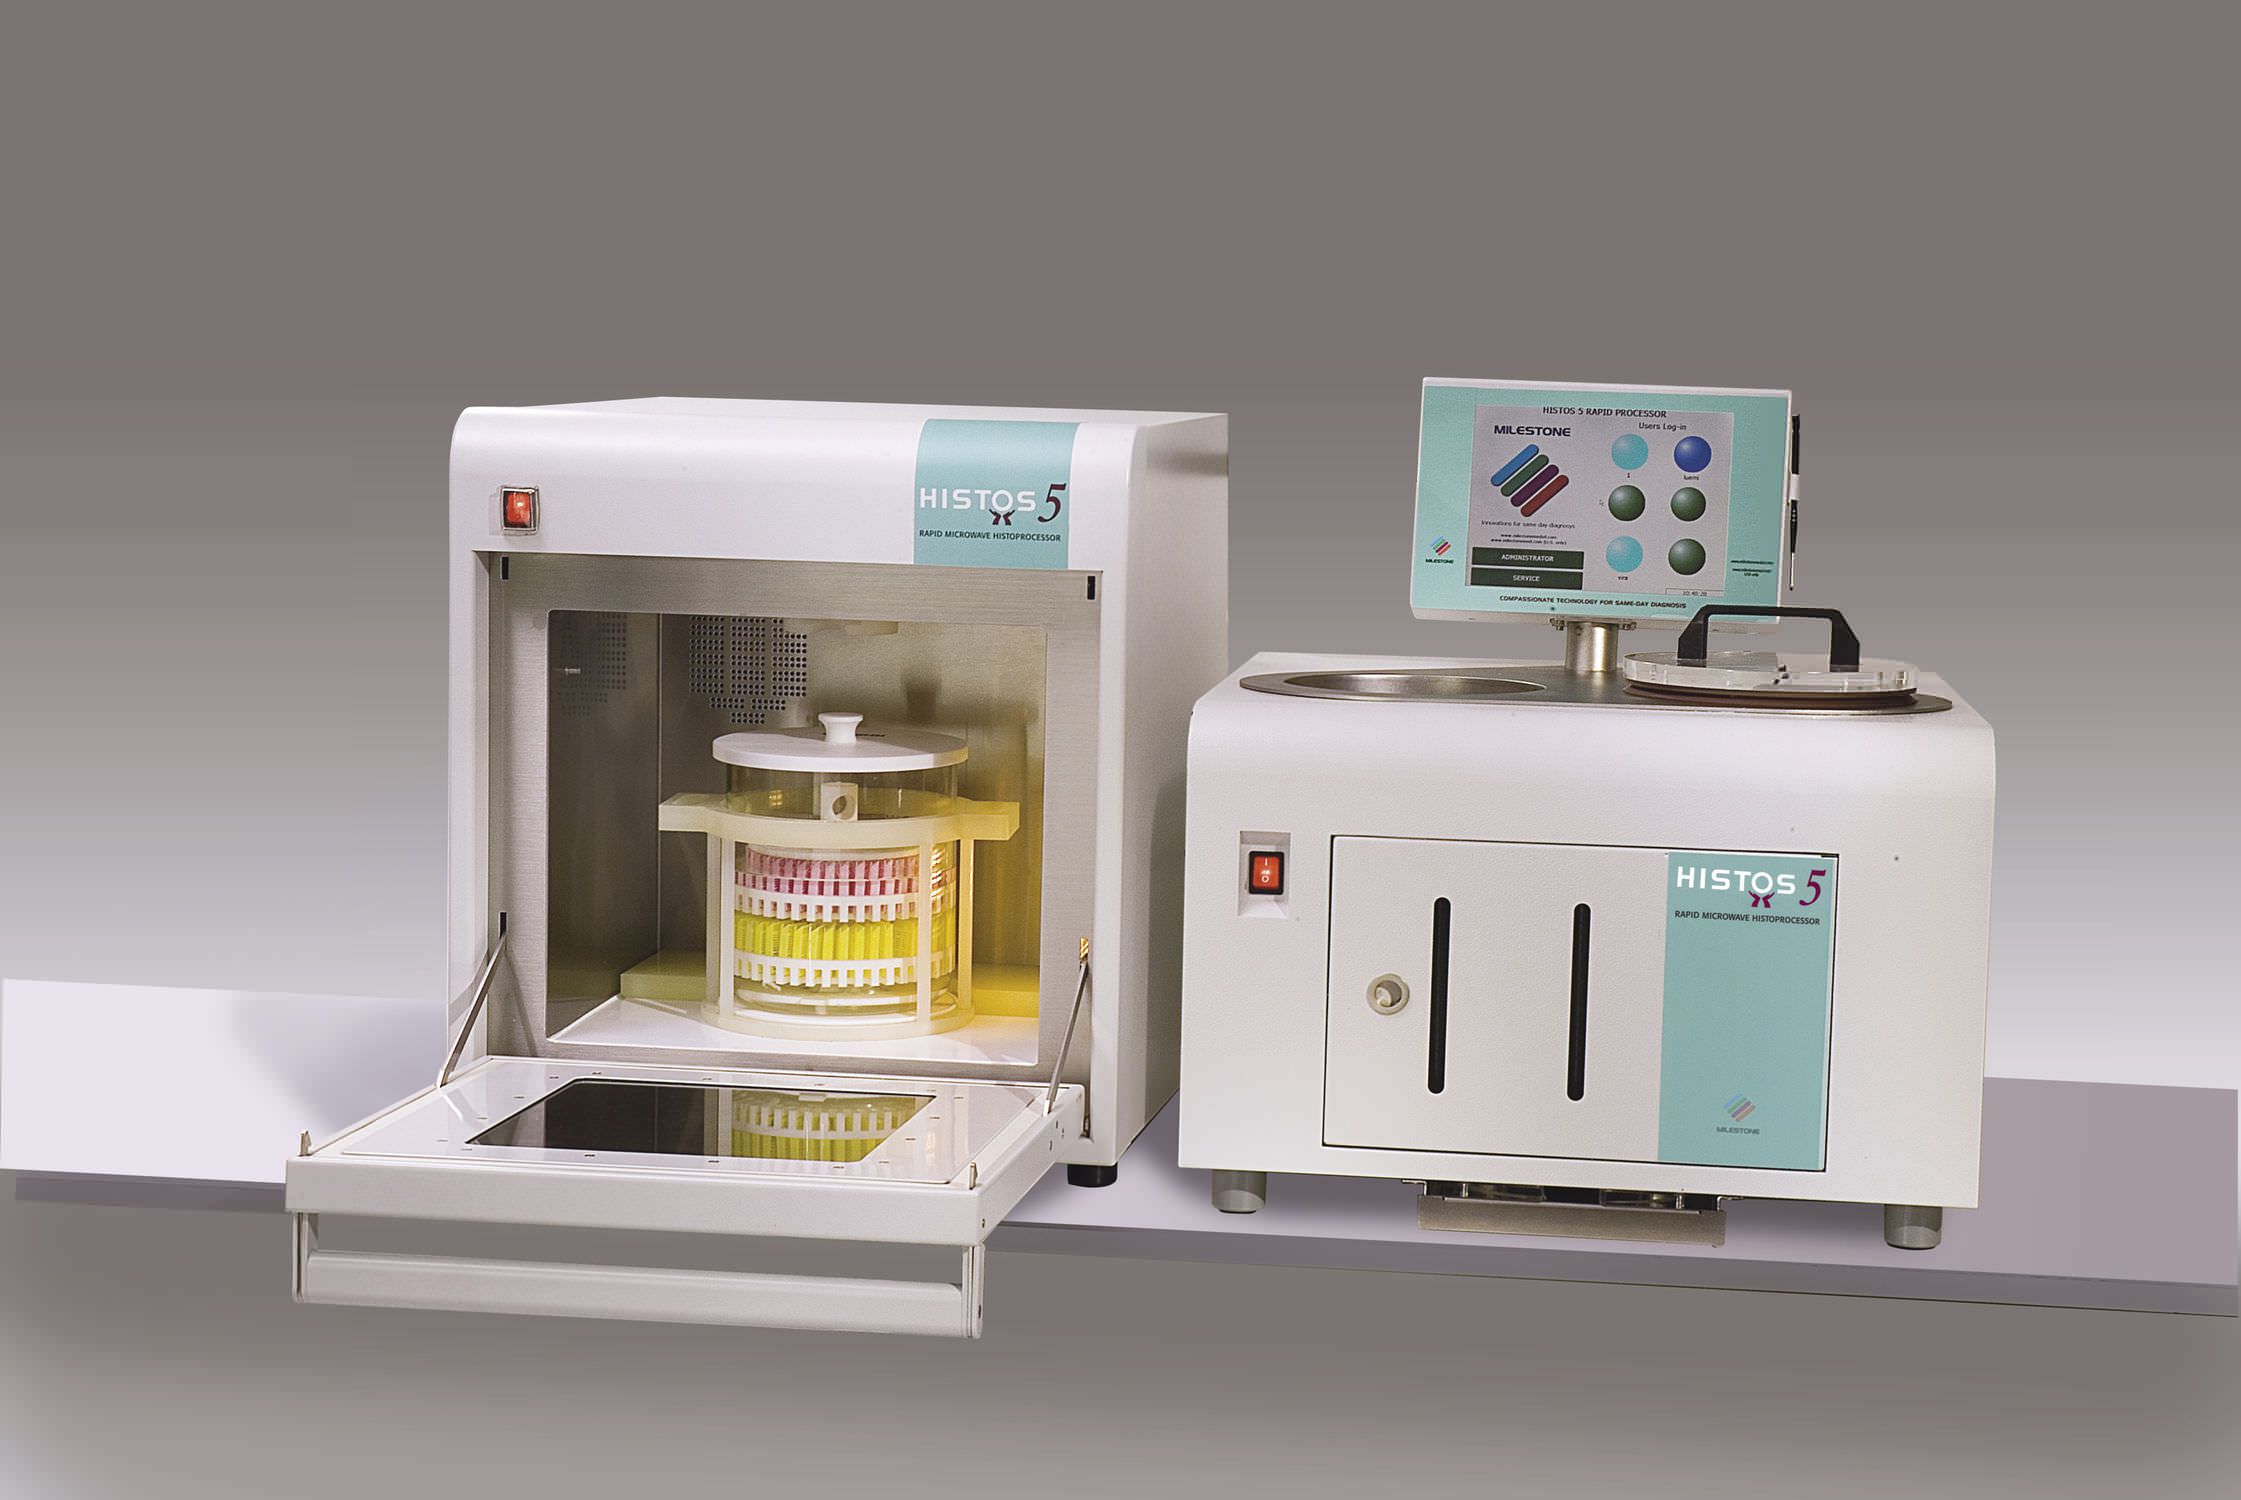 Tissue automatic sample preparation system / for histology / microwave Histos 5 Milestone